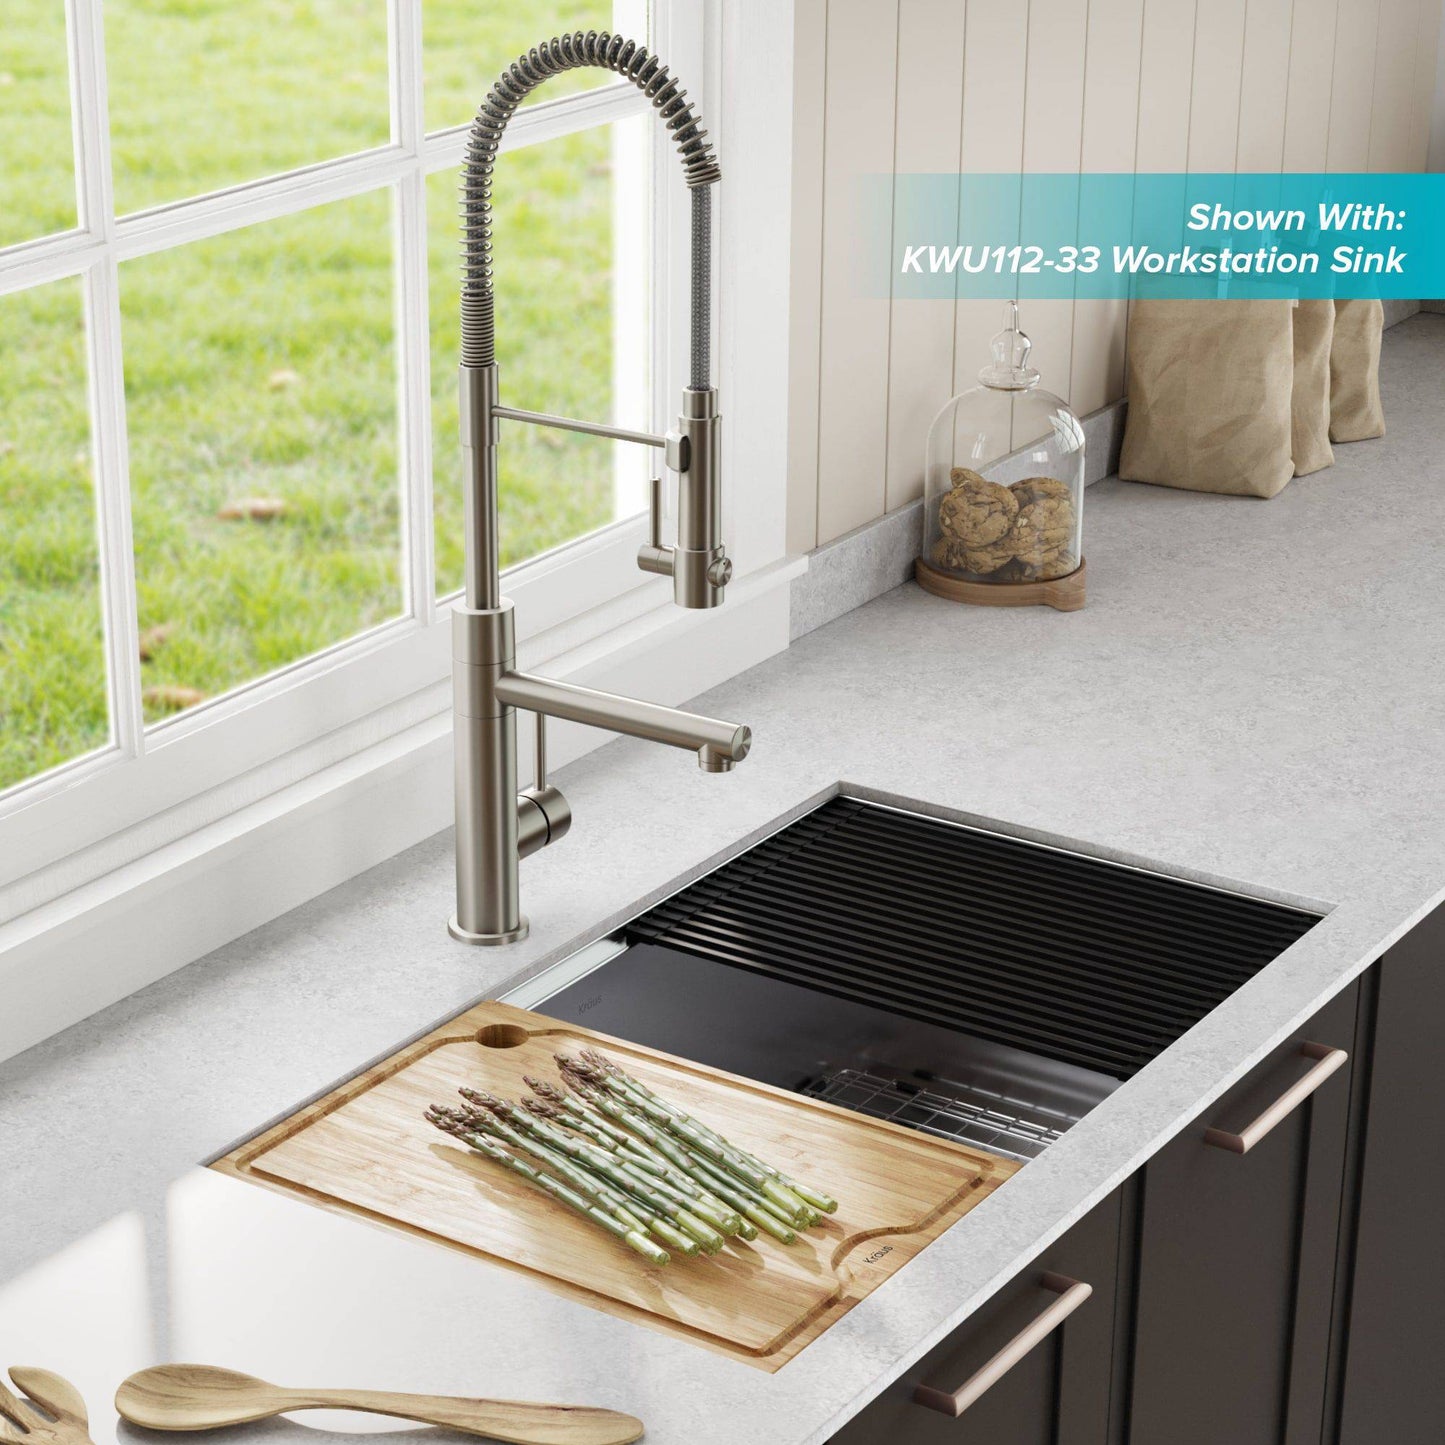 Kraus 24.75" Artec Pro Commercial Style Pre-Rinse Kitchen Faucet in Spot Free Stainless Steel